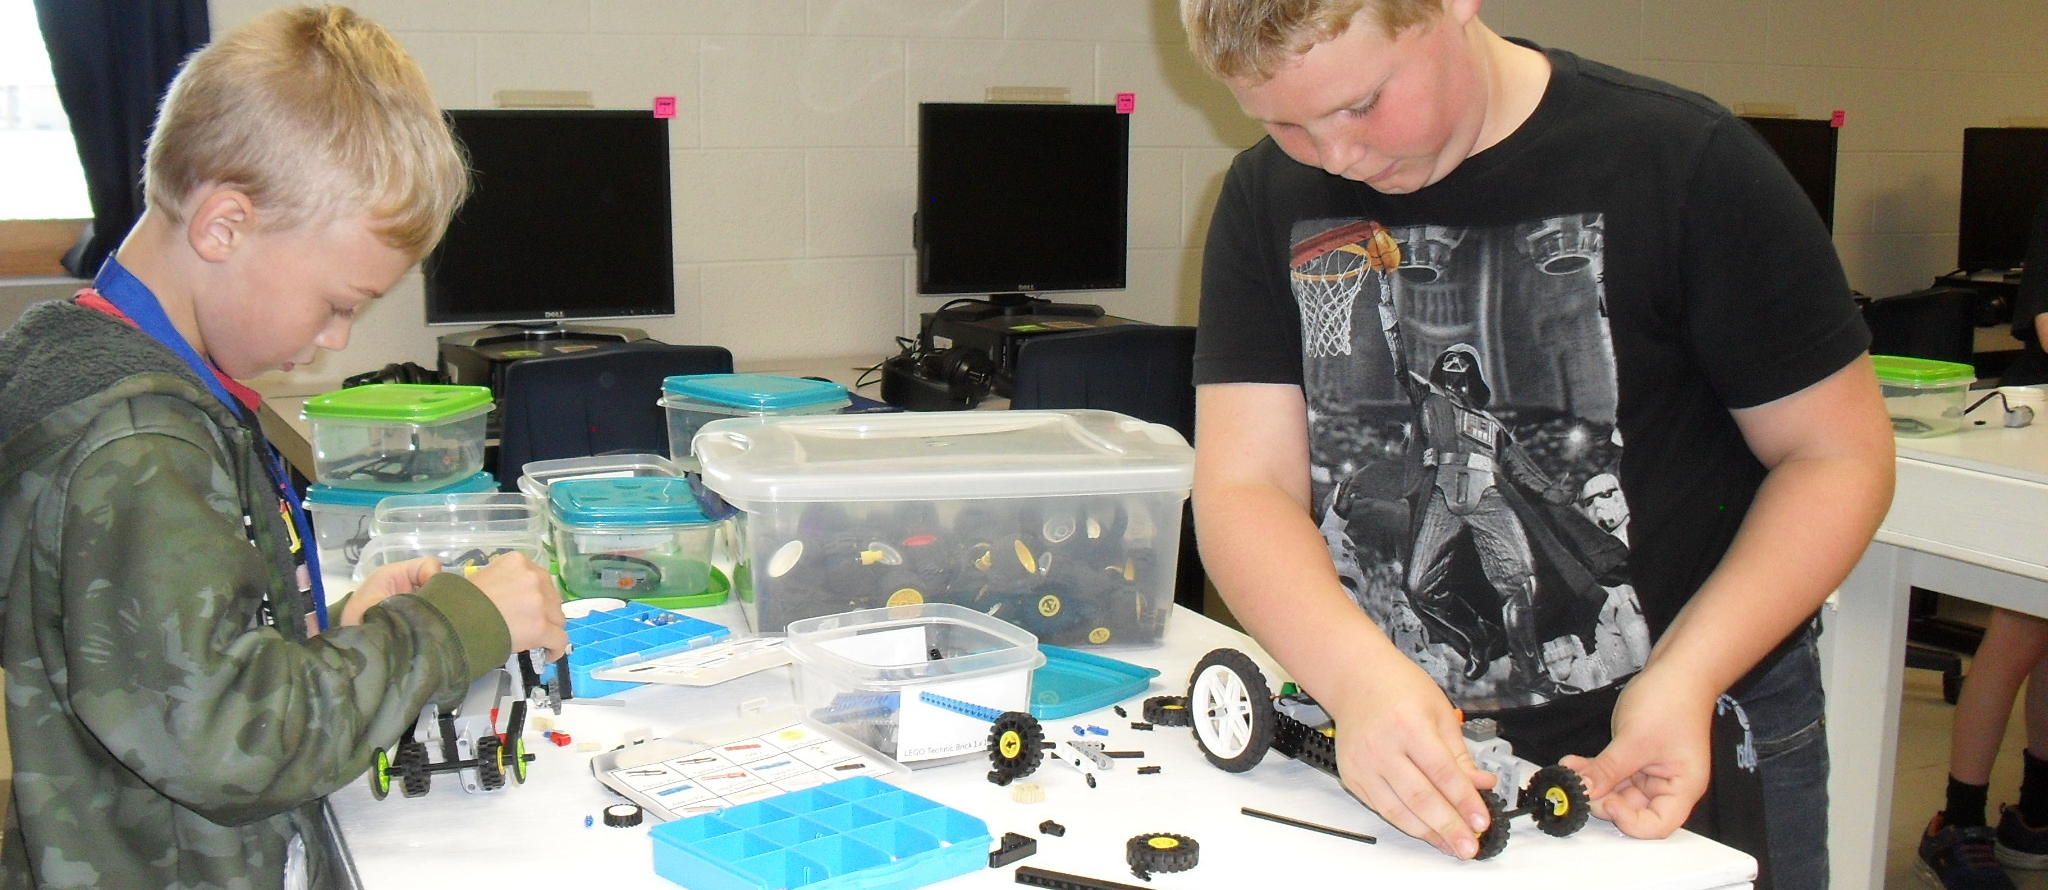 STEM Club students working on Lego projects